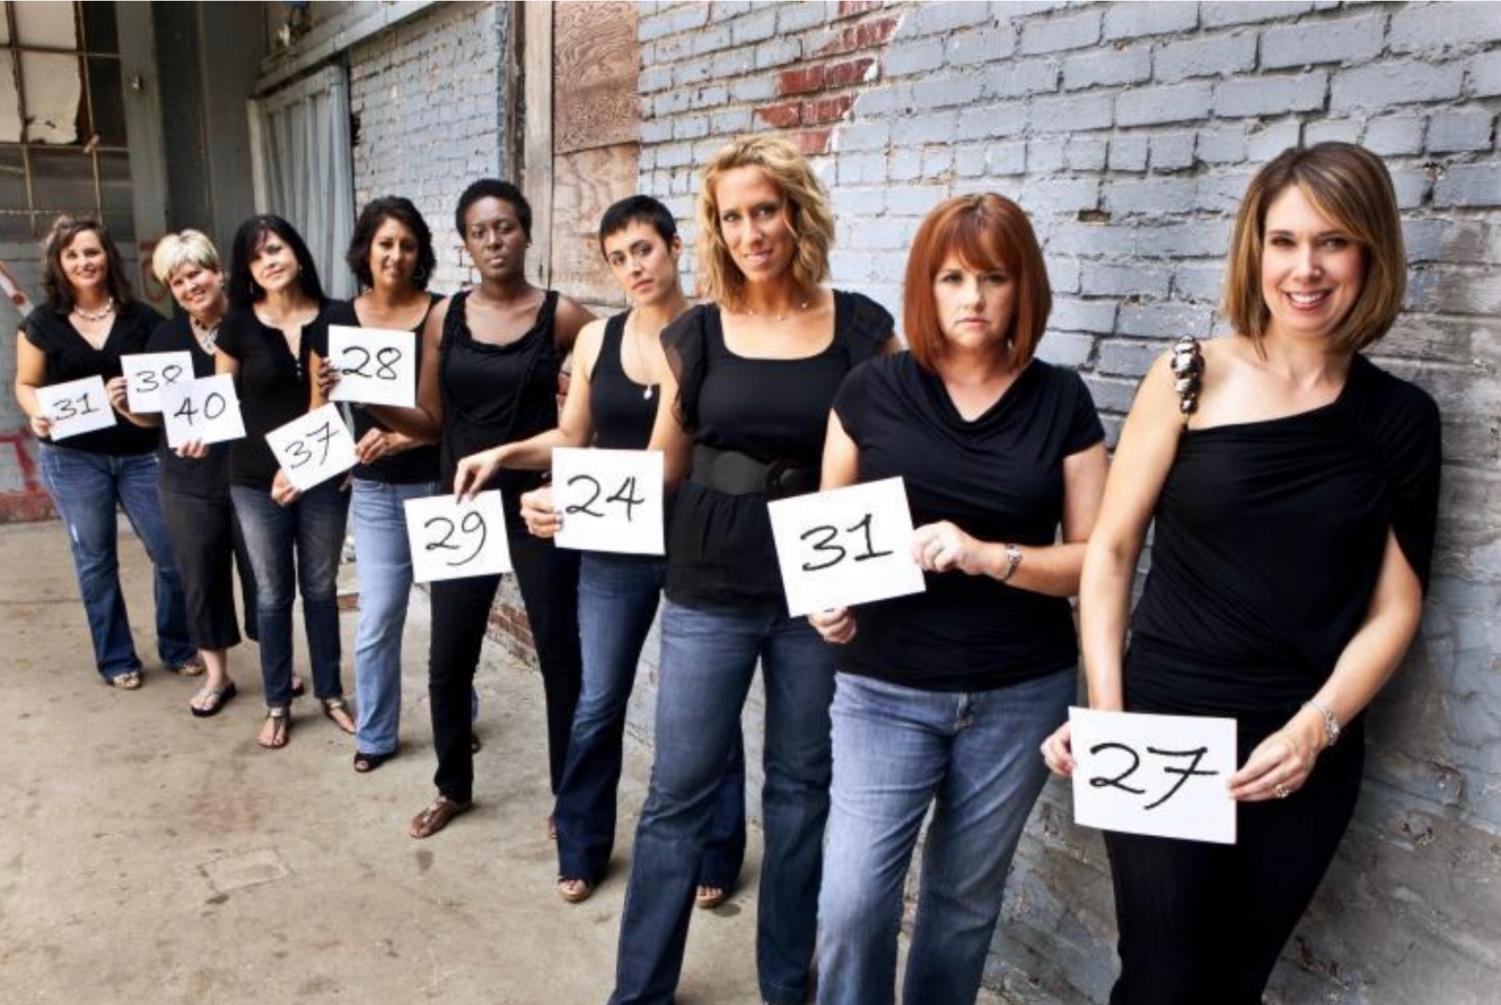 Young breast cancer survivors holding their age at diagnosis. Photo credit YSC.